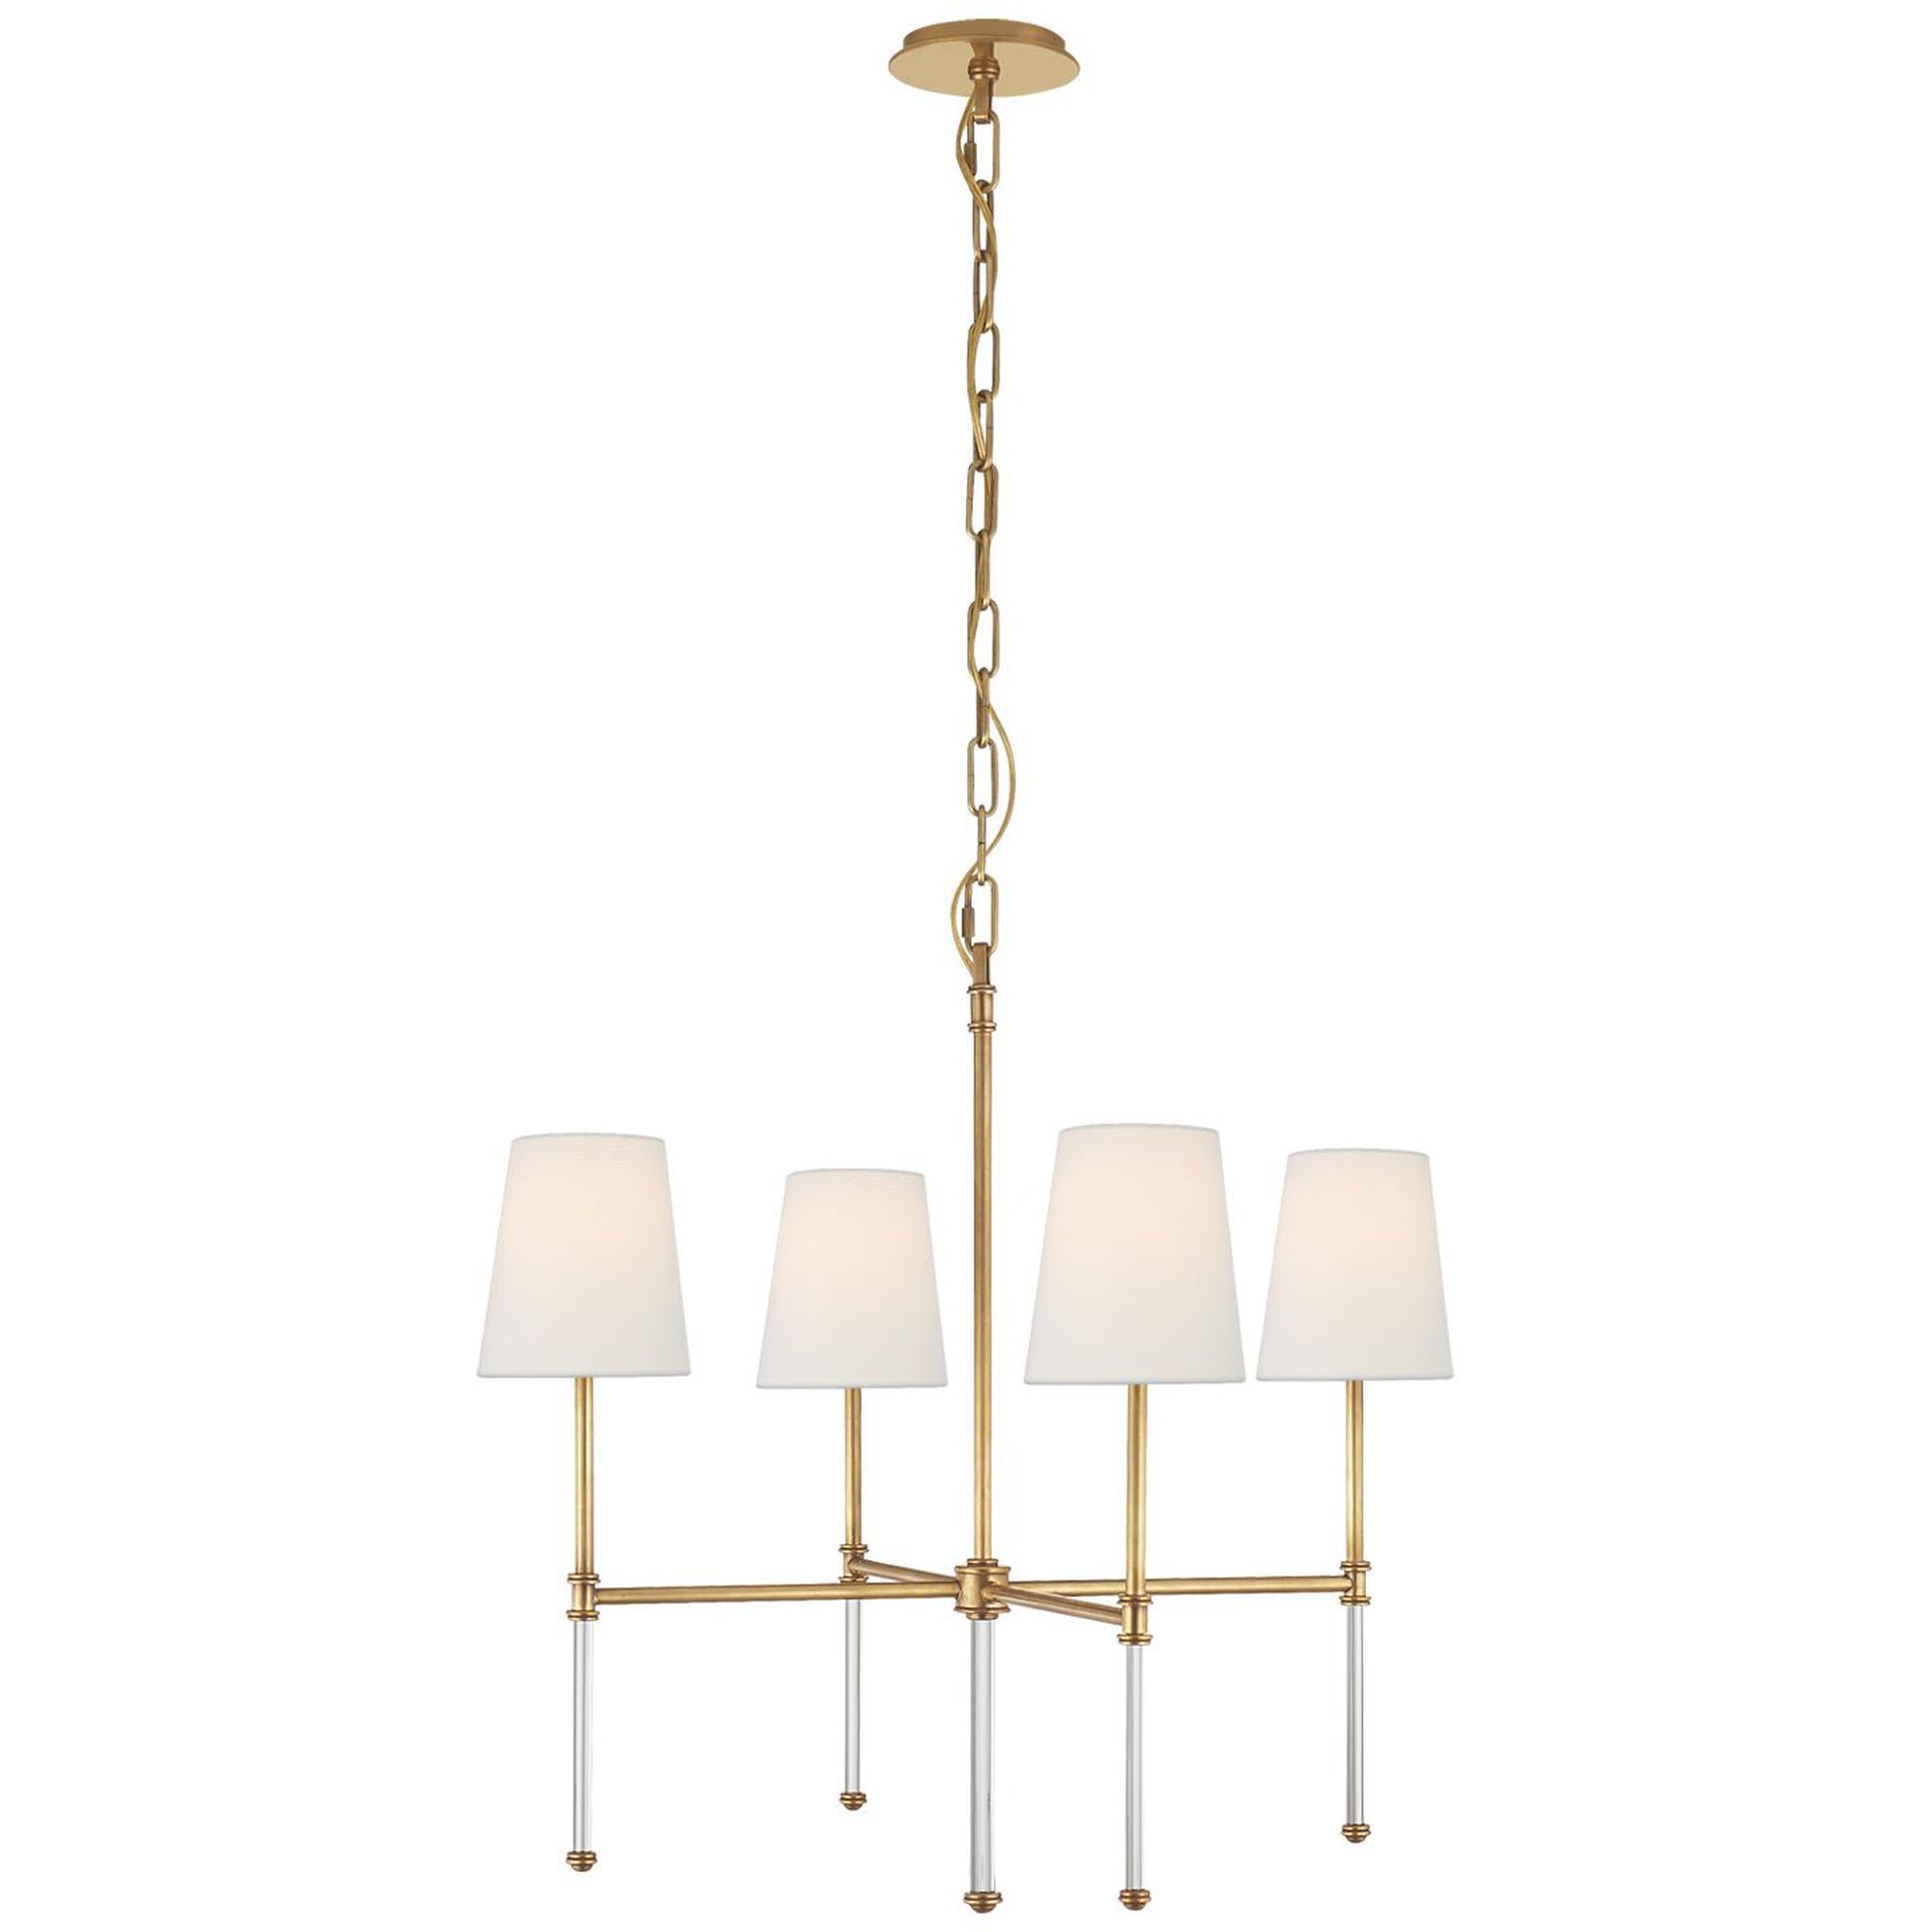 Suzanne Kasler Camille 27 Inch 4 Light Chandelier by Visual Comfort Signature Collection | 1800 Lighting